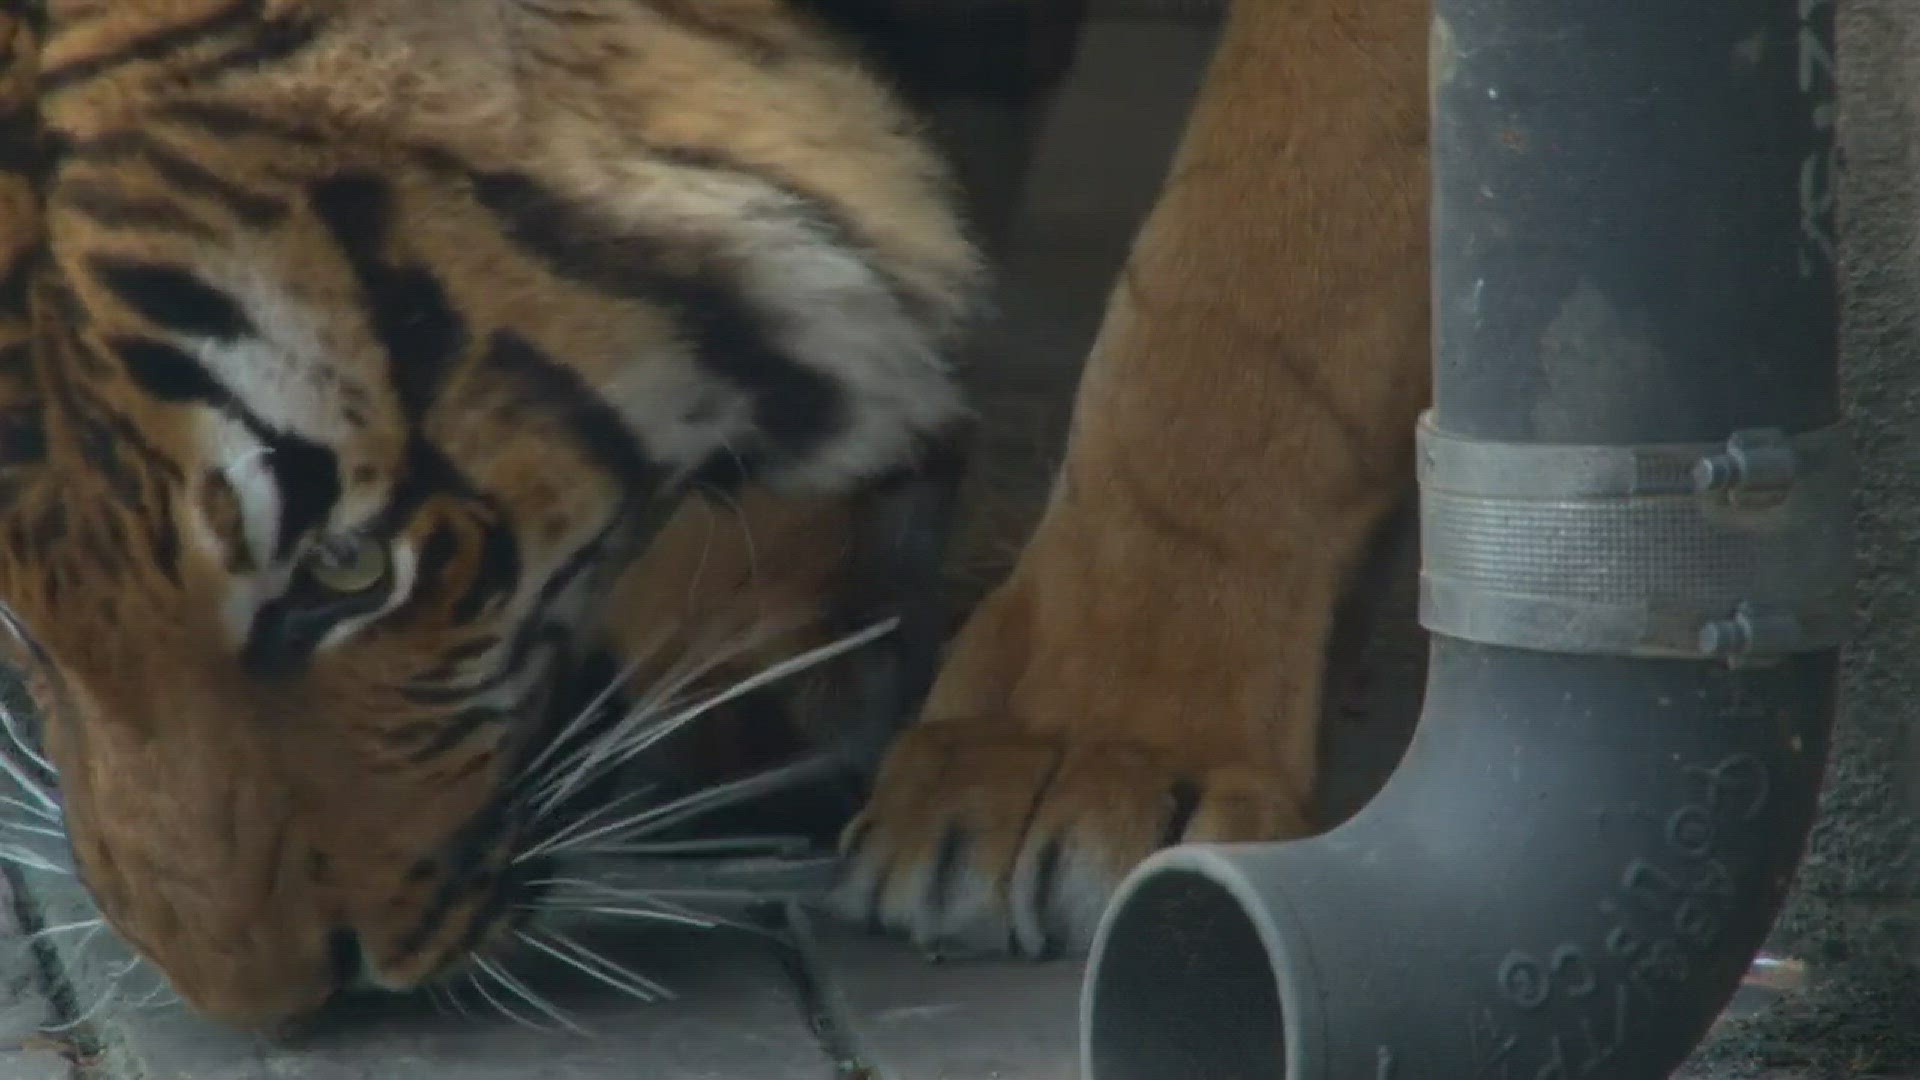 Zoo Knoxville will open its new Tiger Forest exhibit on Friday. Bashir, an 8-year-old male, is exploring his new home